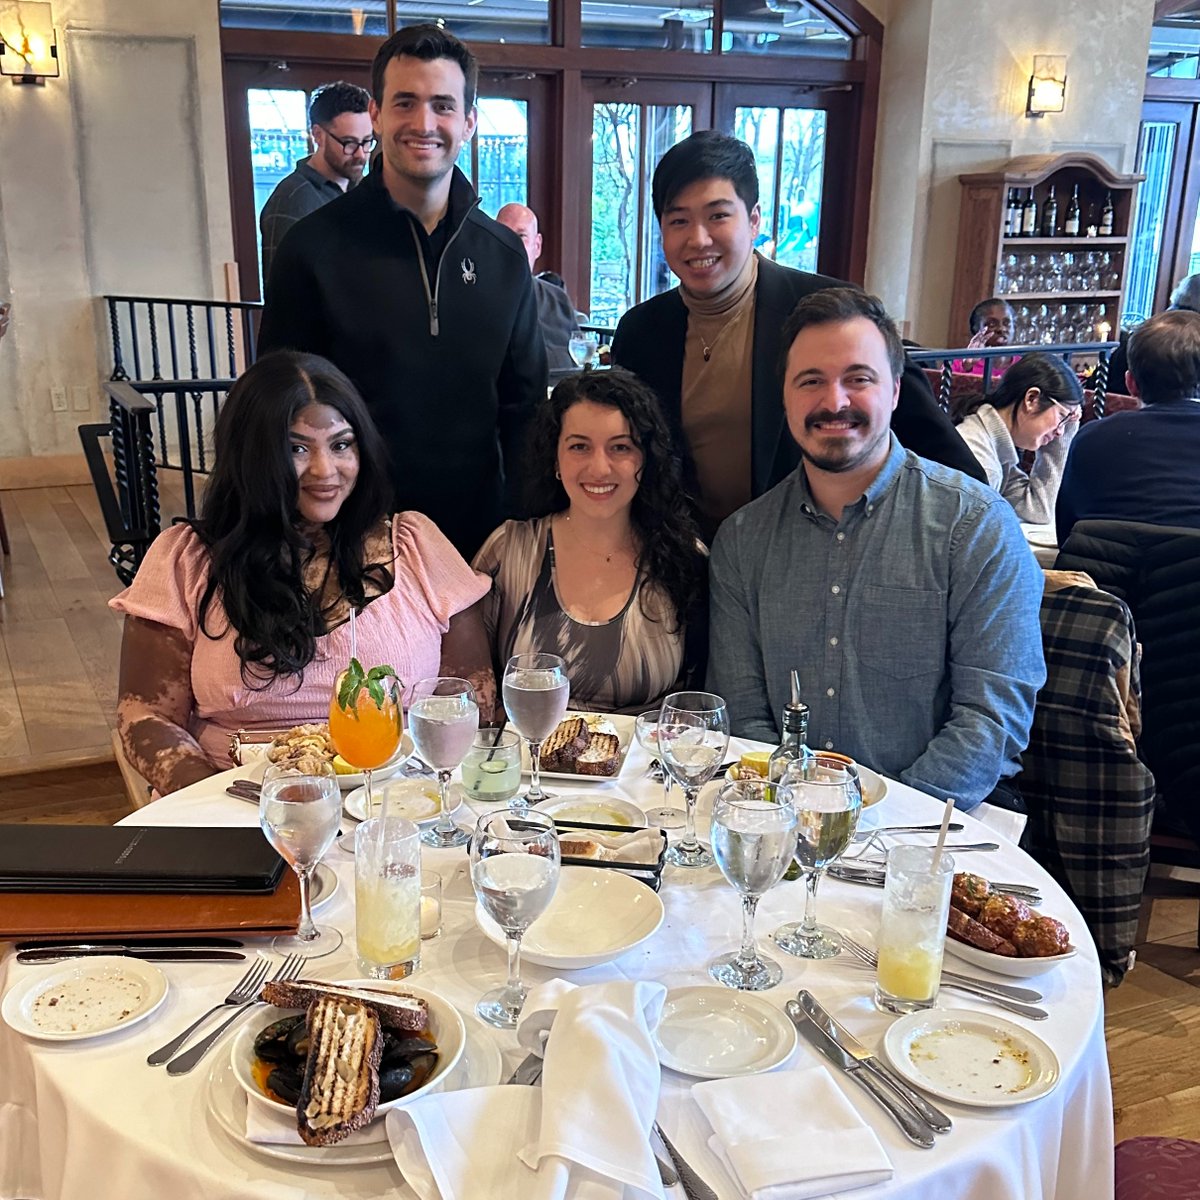 The GSA members gathered to celebrate all the events and memories throughout the year! // #NYMCambassador post from Christopher L., BMS student, #NYMC GSBMS. #NYMCGSBMS #biomedicalsciences #gradschool #college // #westchester